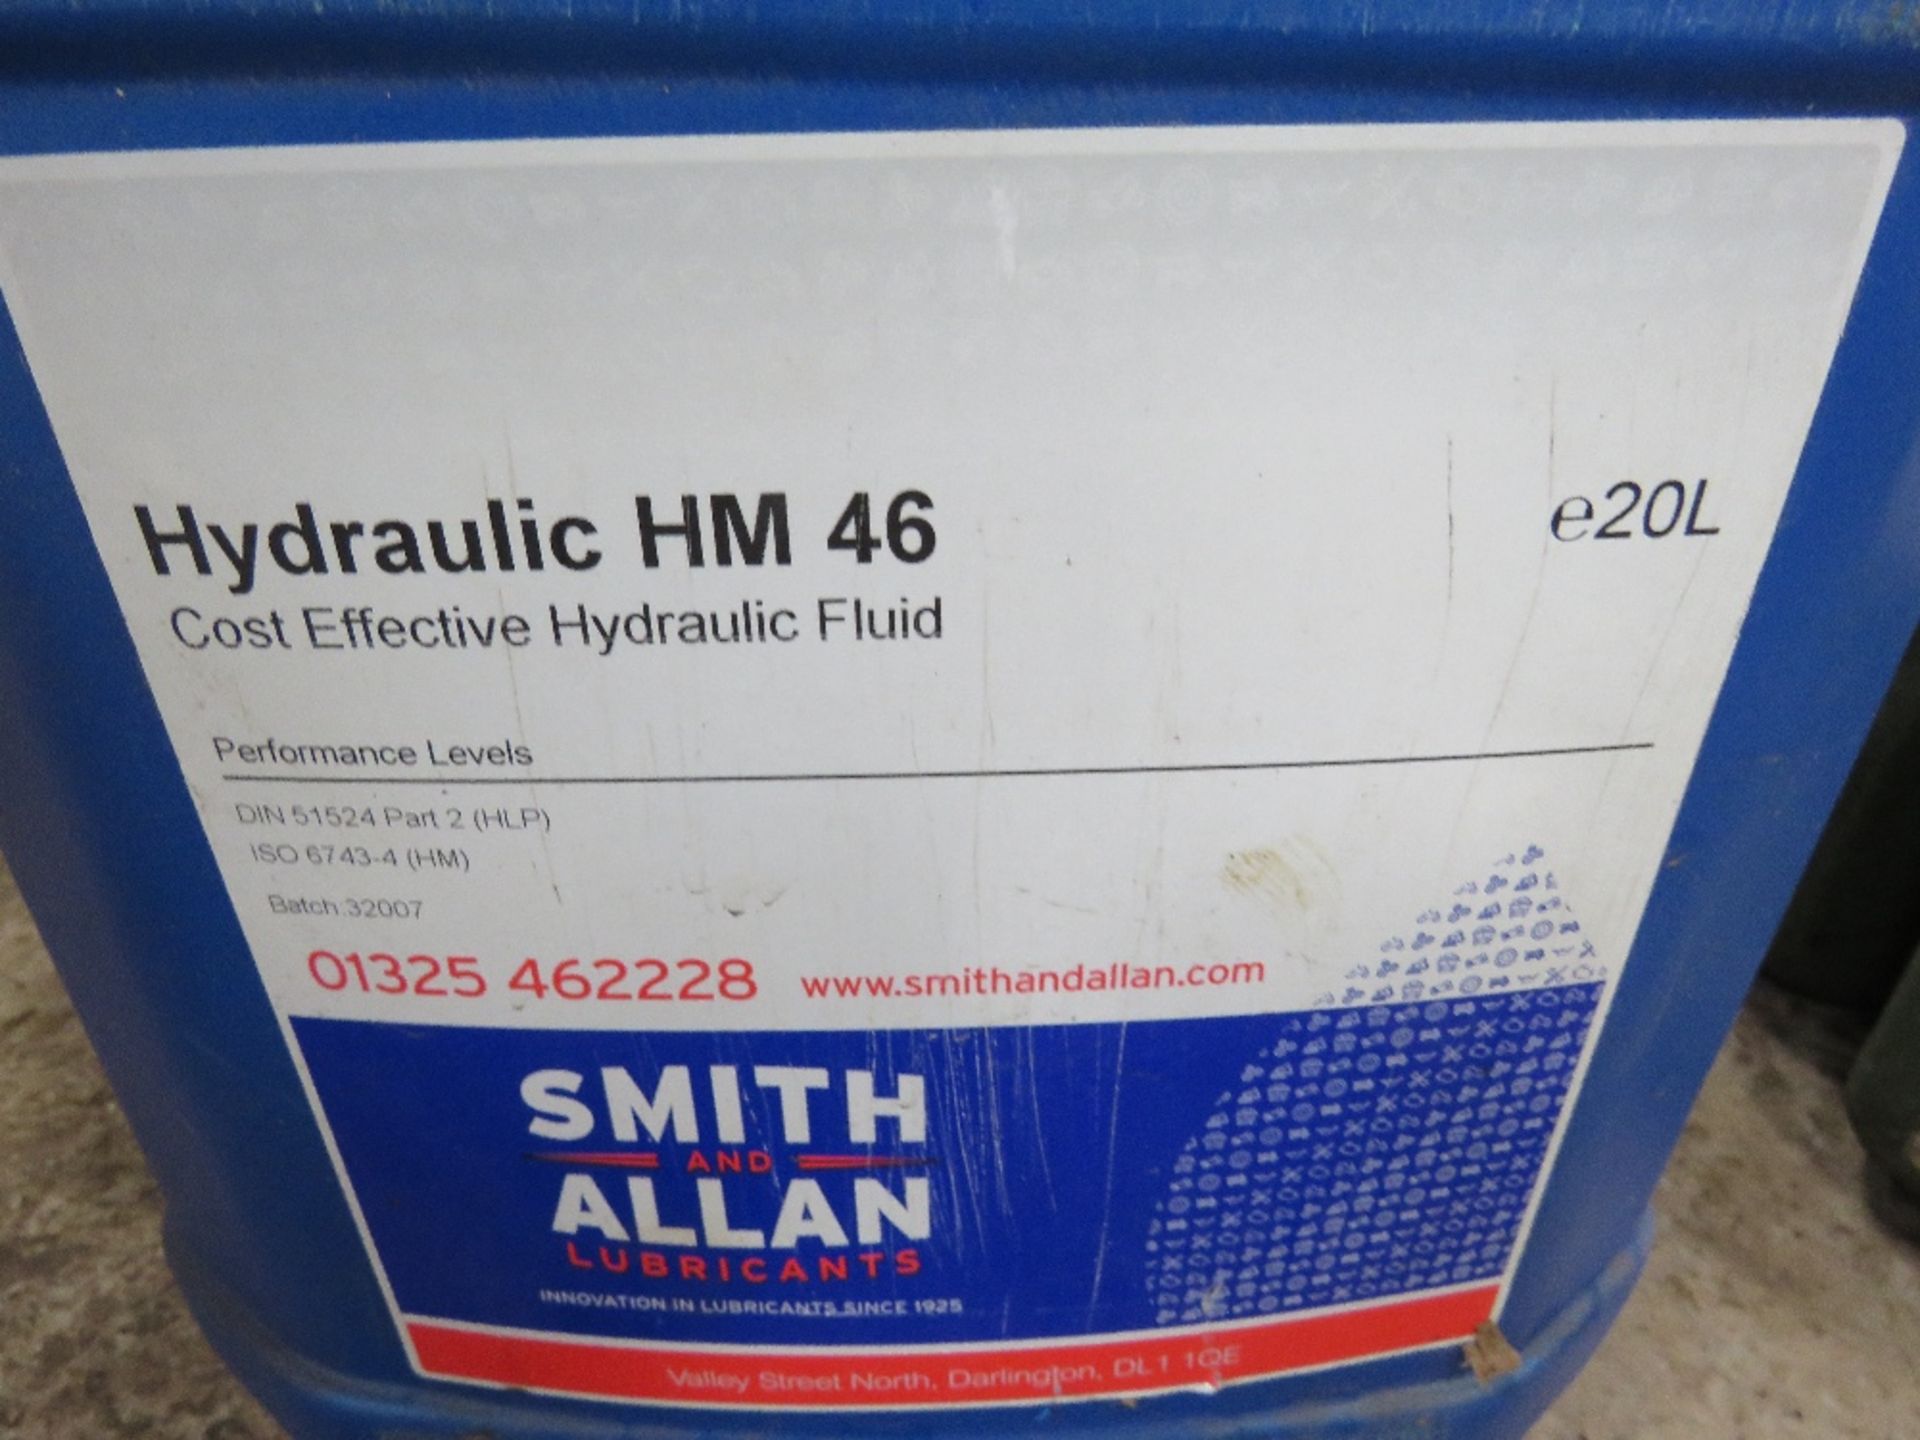 DRUM OF HM46 HYDRAULIC OIL. DIRECT FROM LANDSCAPE MAINTENANCE COMPANY DUE TO DEPOT CLOSURE. - Image 3 of 3